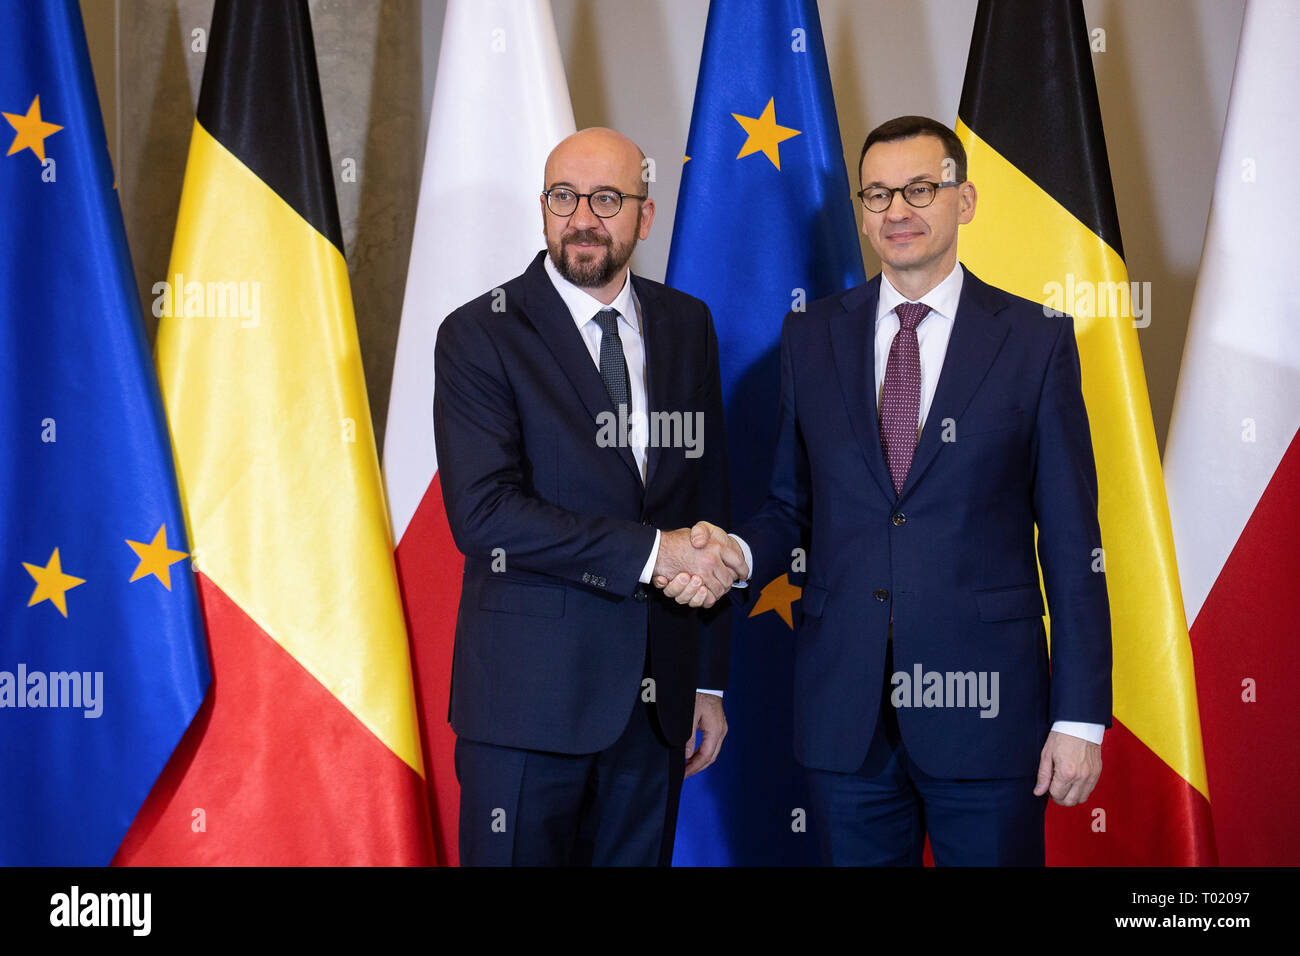 Prime Minister of Belgium Charles Michel and Prime Minister of Poland Mateusz Morawiecki during the meeting in Warsaw, Poland on 12 March 2019 Stock Photo